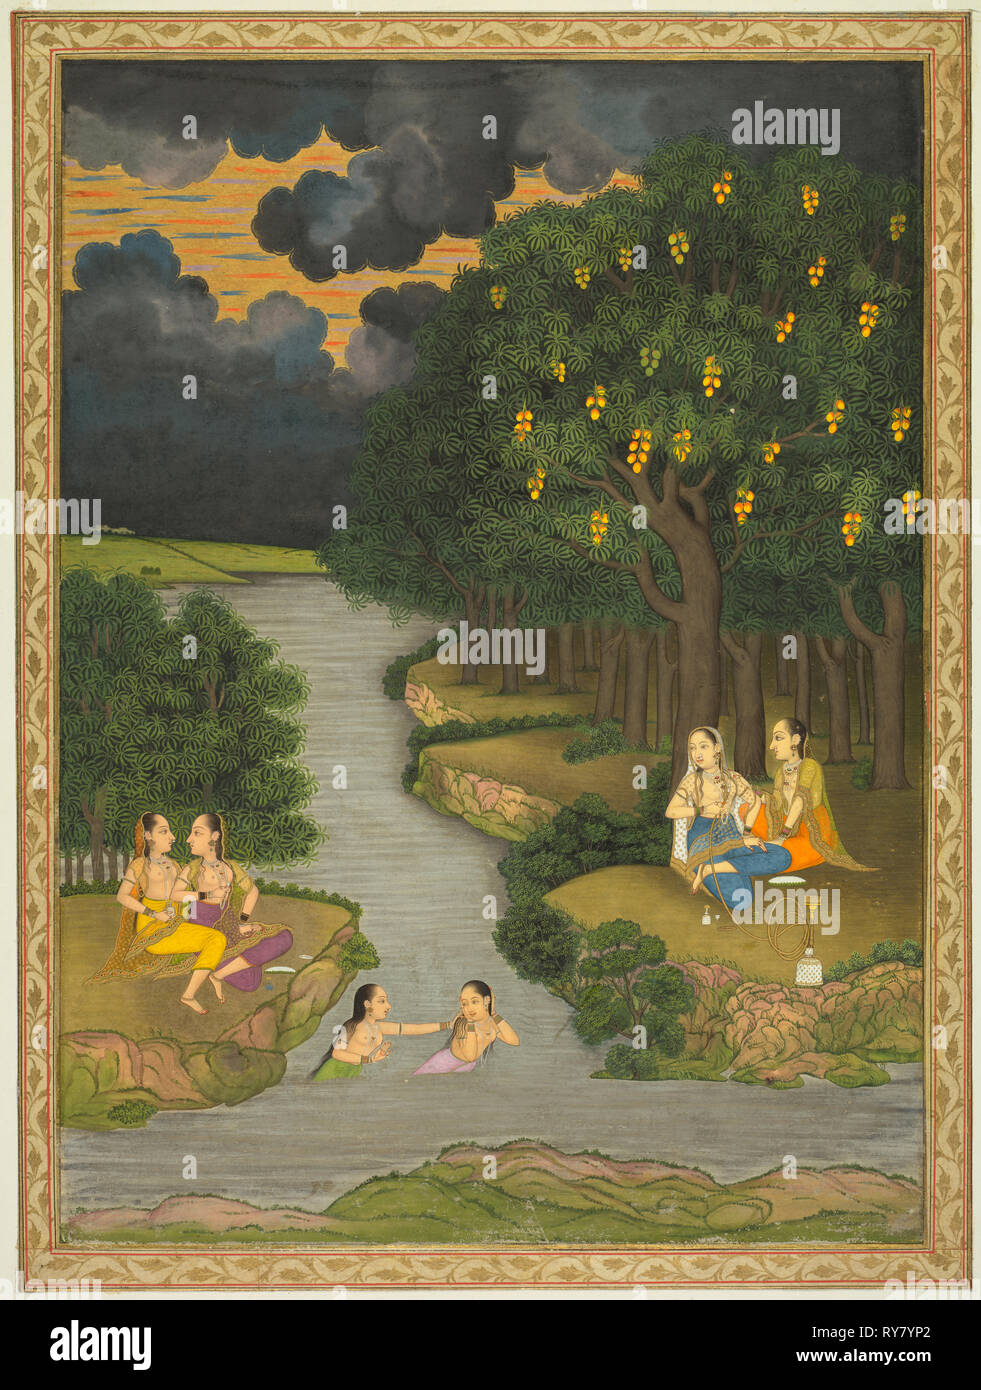 Women Enjoying the River at the Forest’s Edge, c. 1765. Style of Hunhar II (Indian, active mid-1700s). Opaque watercolor with gold on paper, narrow border of gold foliate meander (recto); page: 33.1 x 24.9 cm (13 1/16 x 9 13/16 in Stock Photo